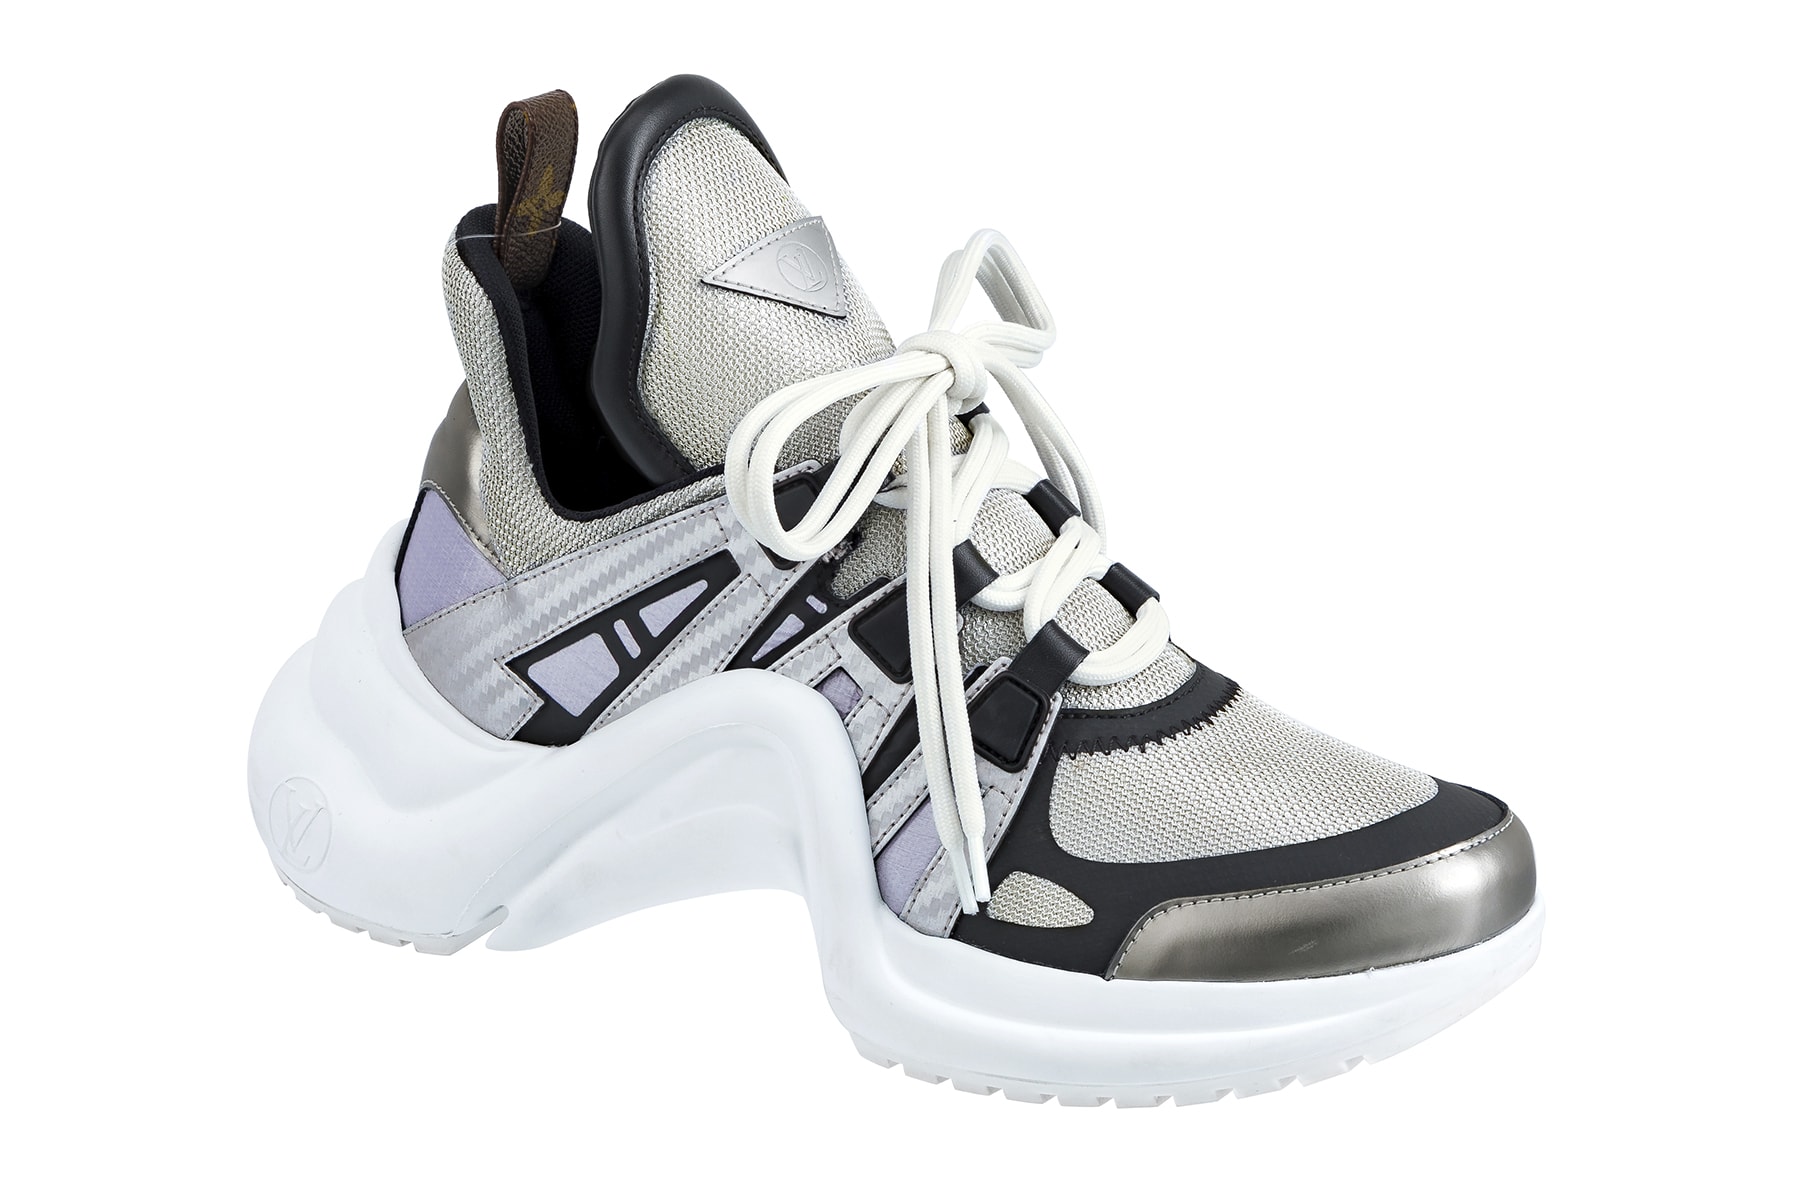 Get the Louis Vuitton Archlight sneaker look for less on Fashion